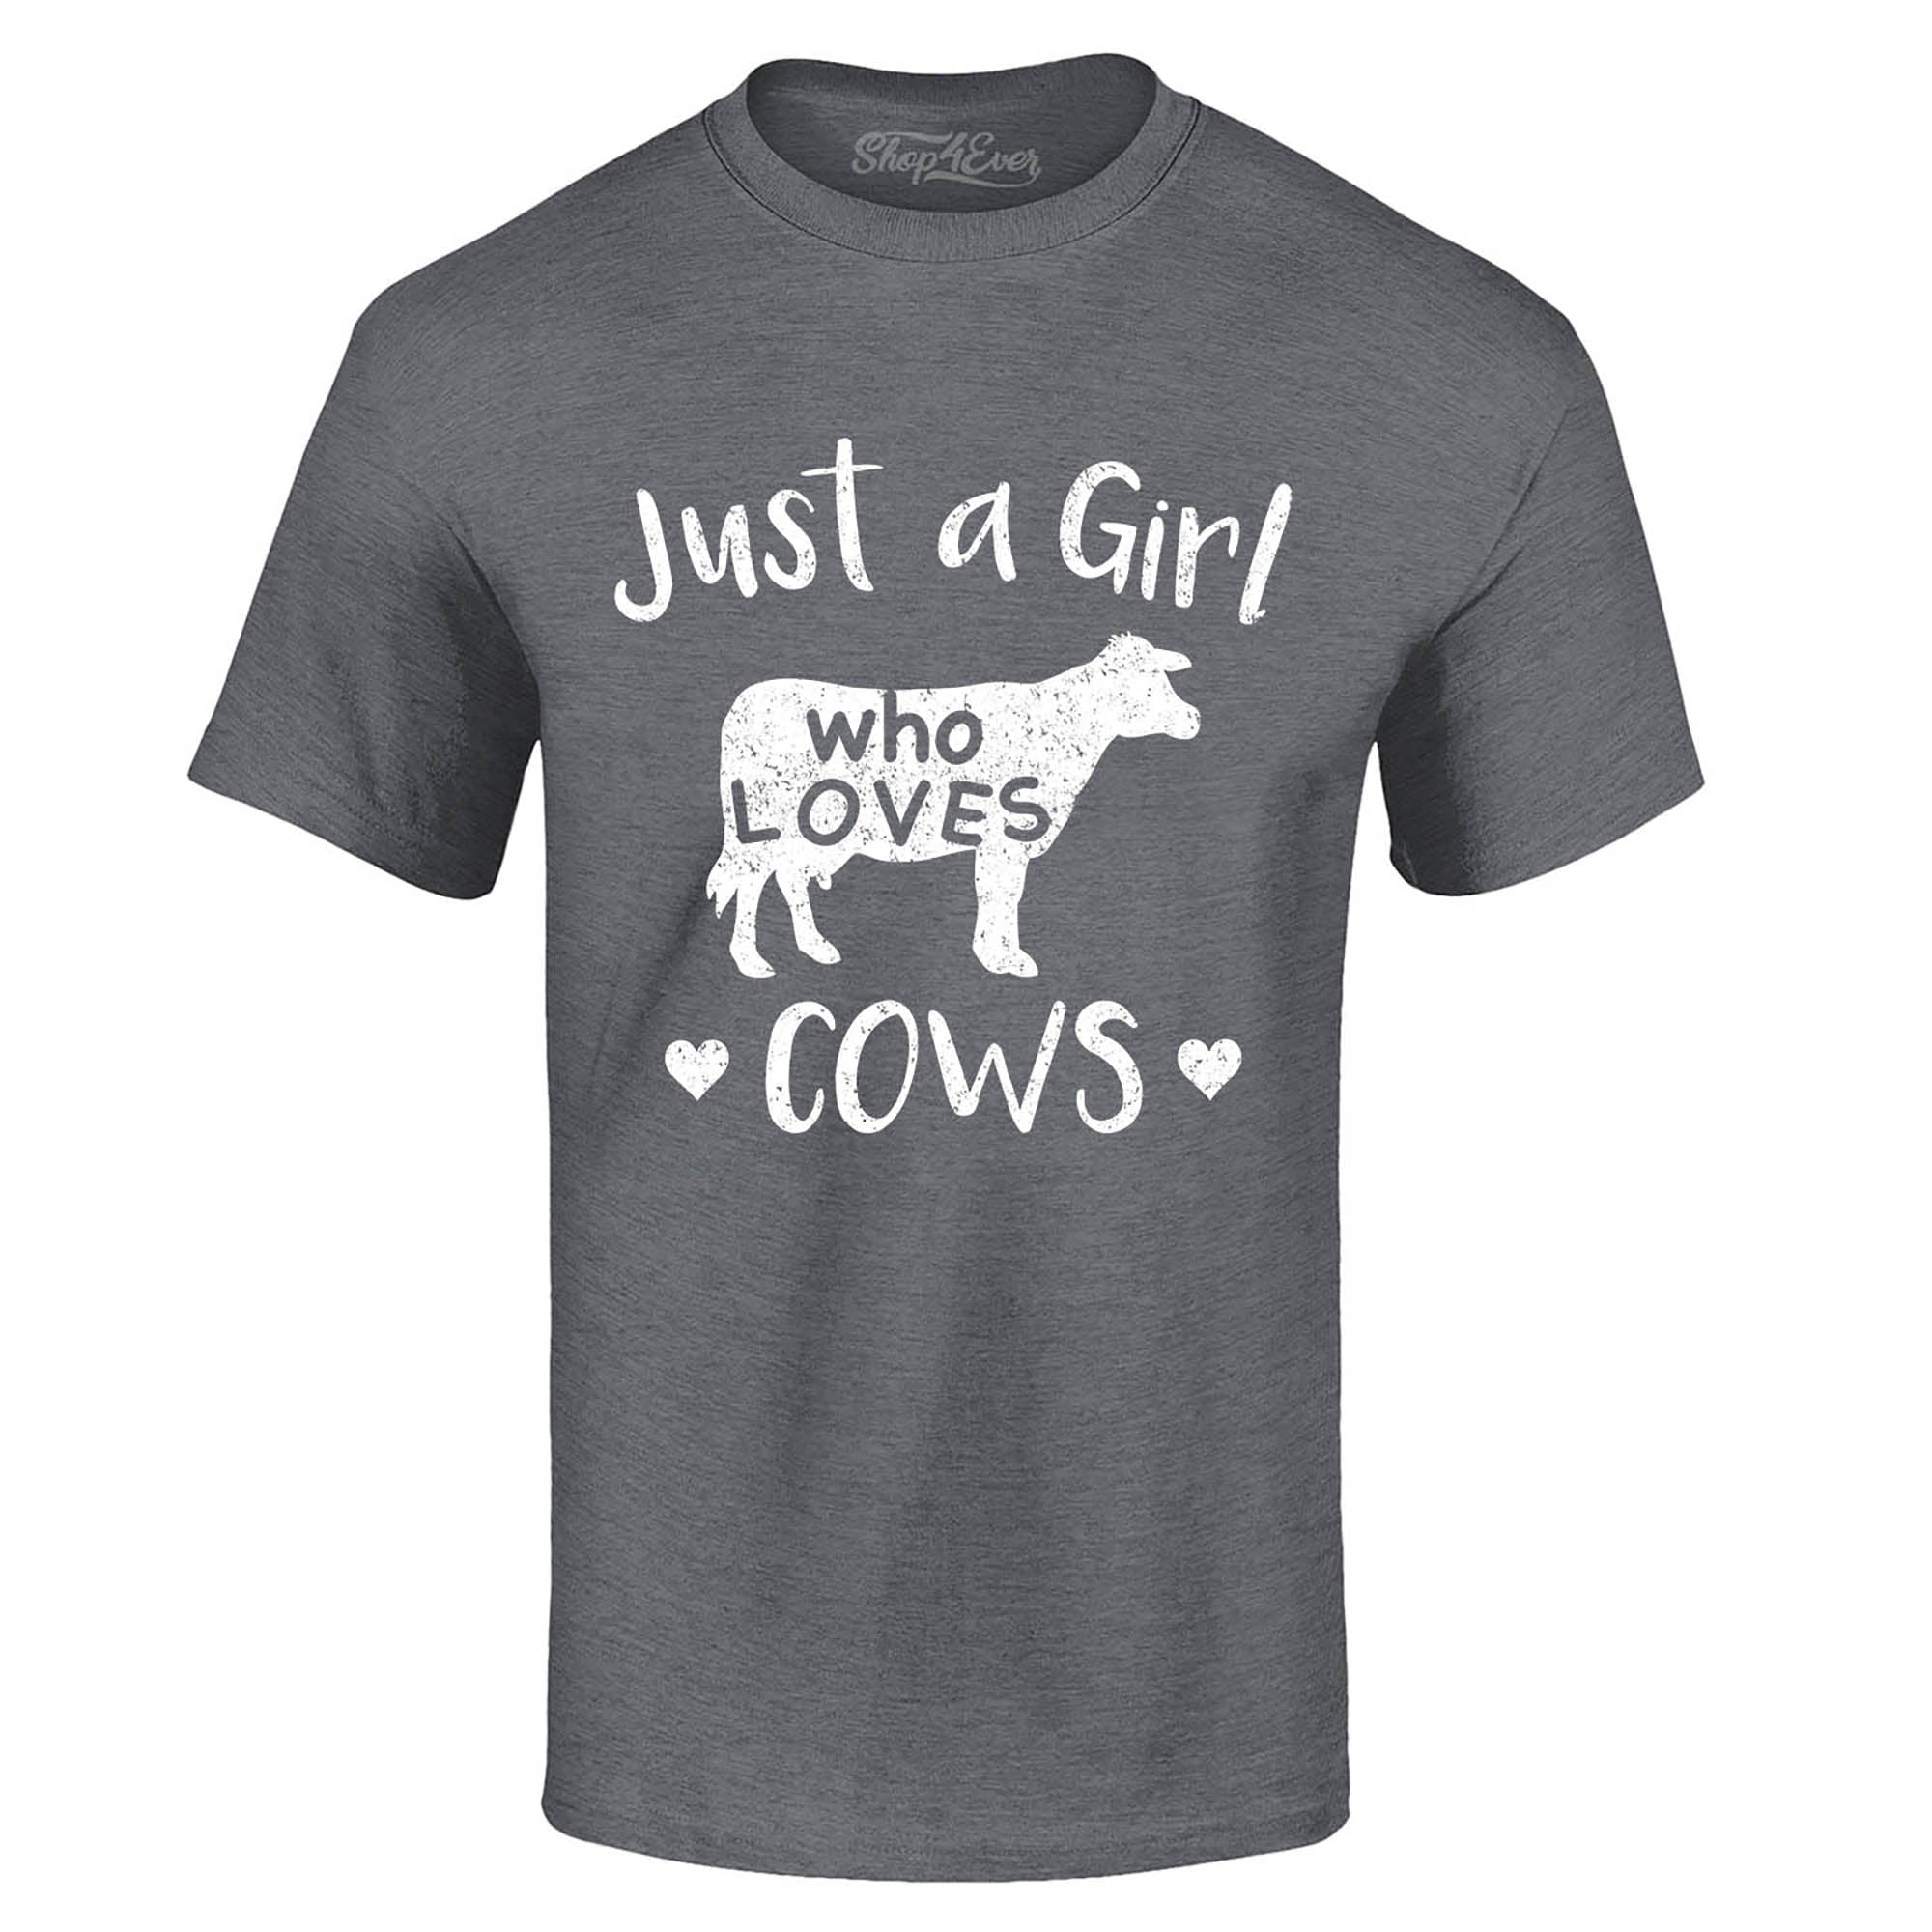 Just A Girl Who Loves Cows T-Shirt